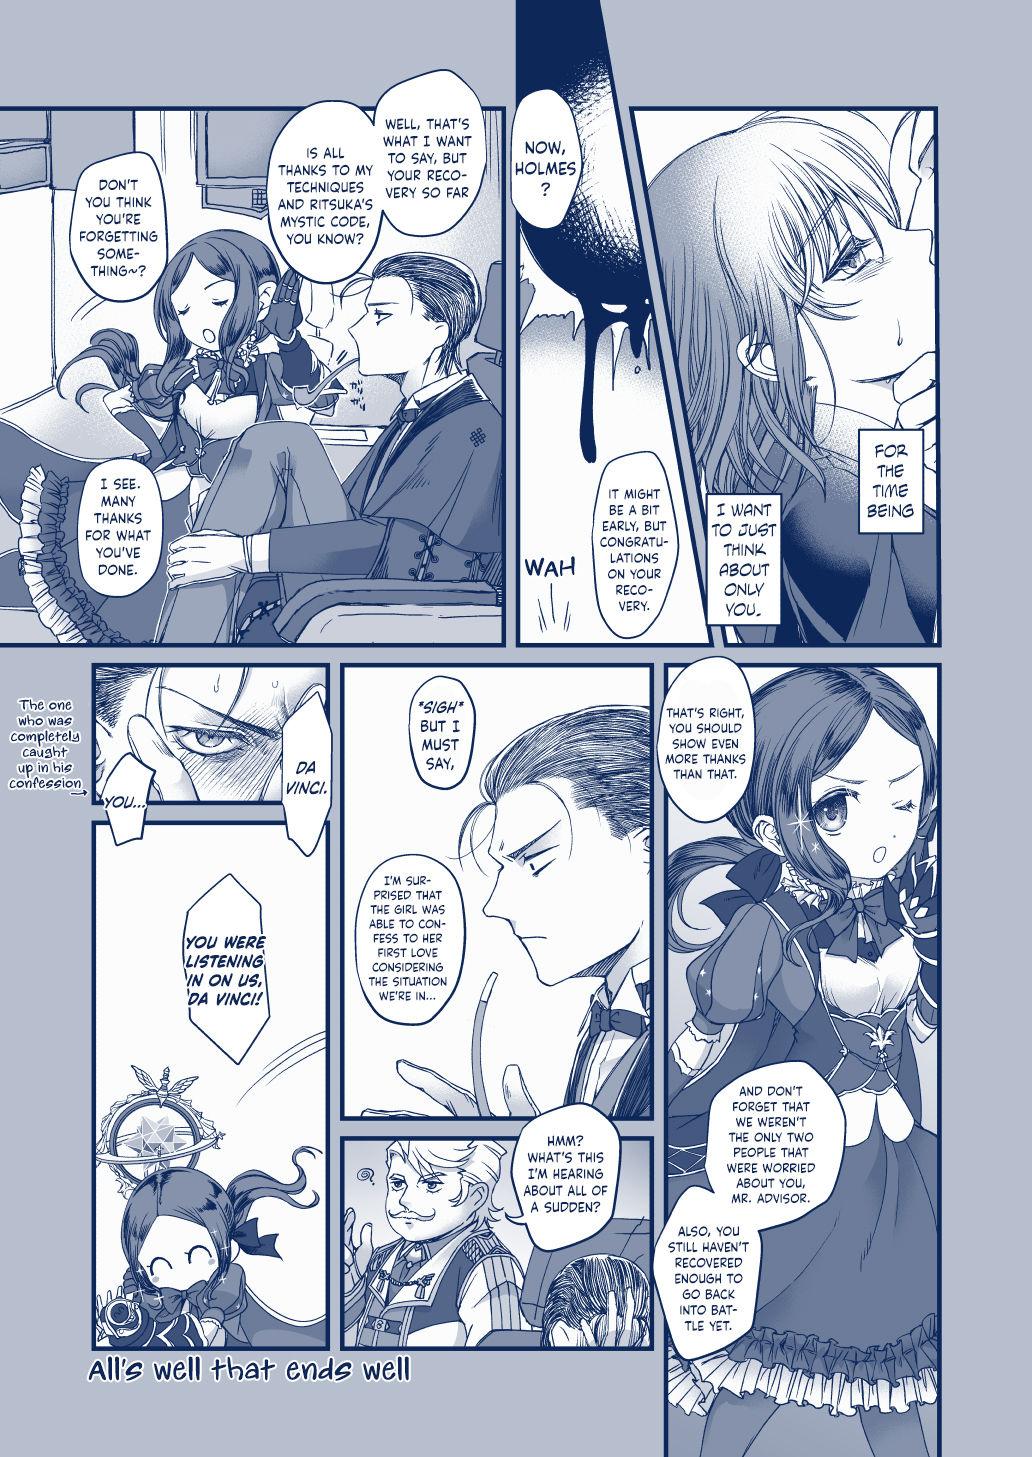 Best Blow Job Ever Suisei o Tsukanda Hi | The Day I Caught a Comet - Fate grand order Best Blowjob - Page 17